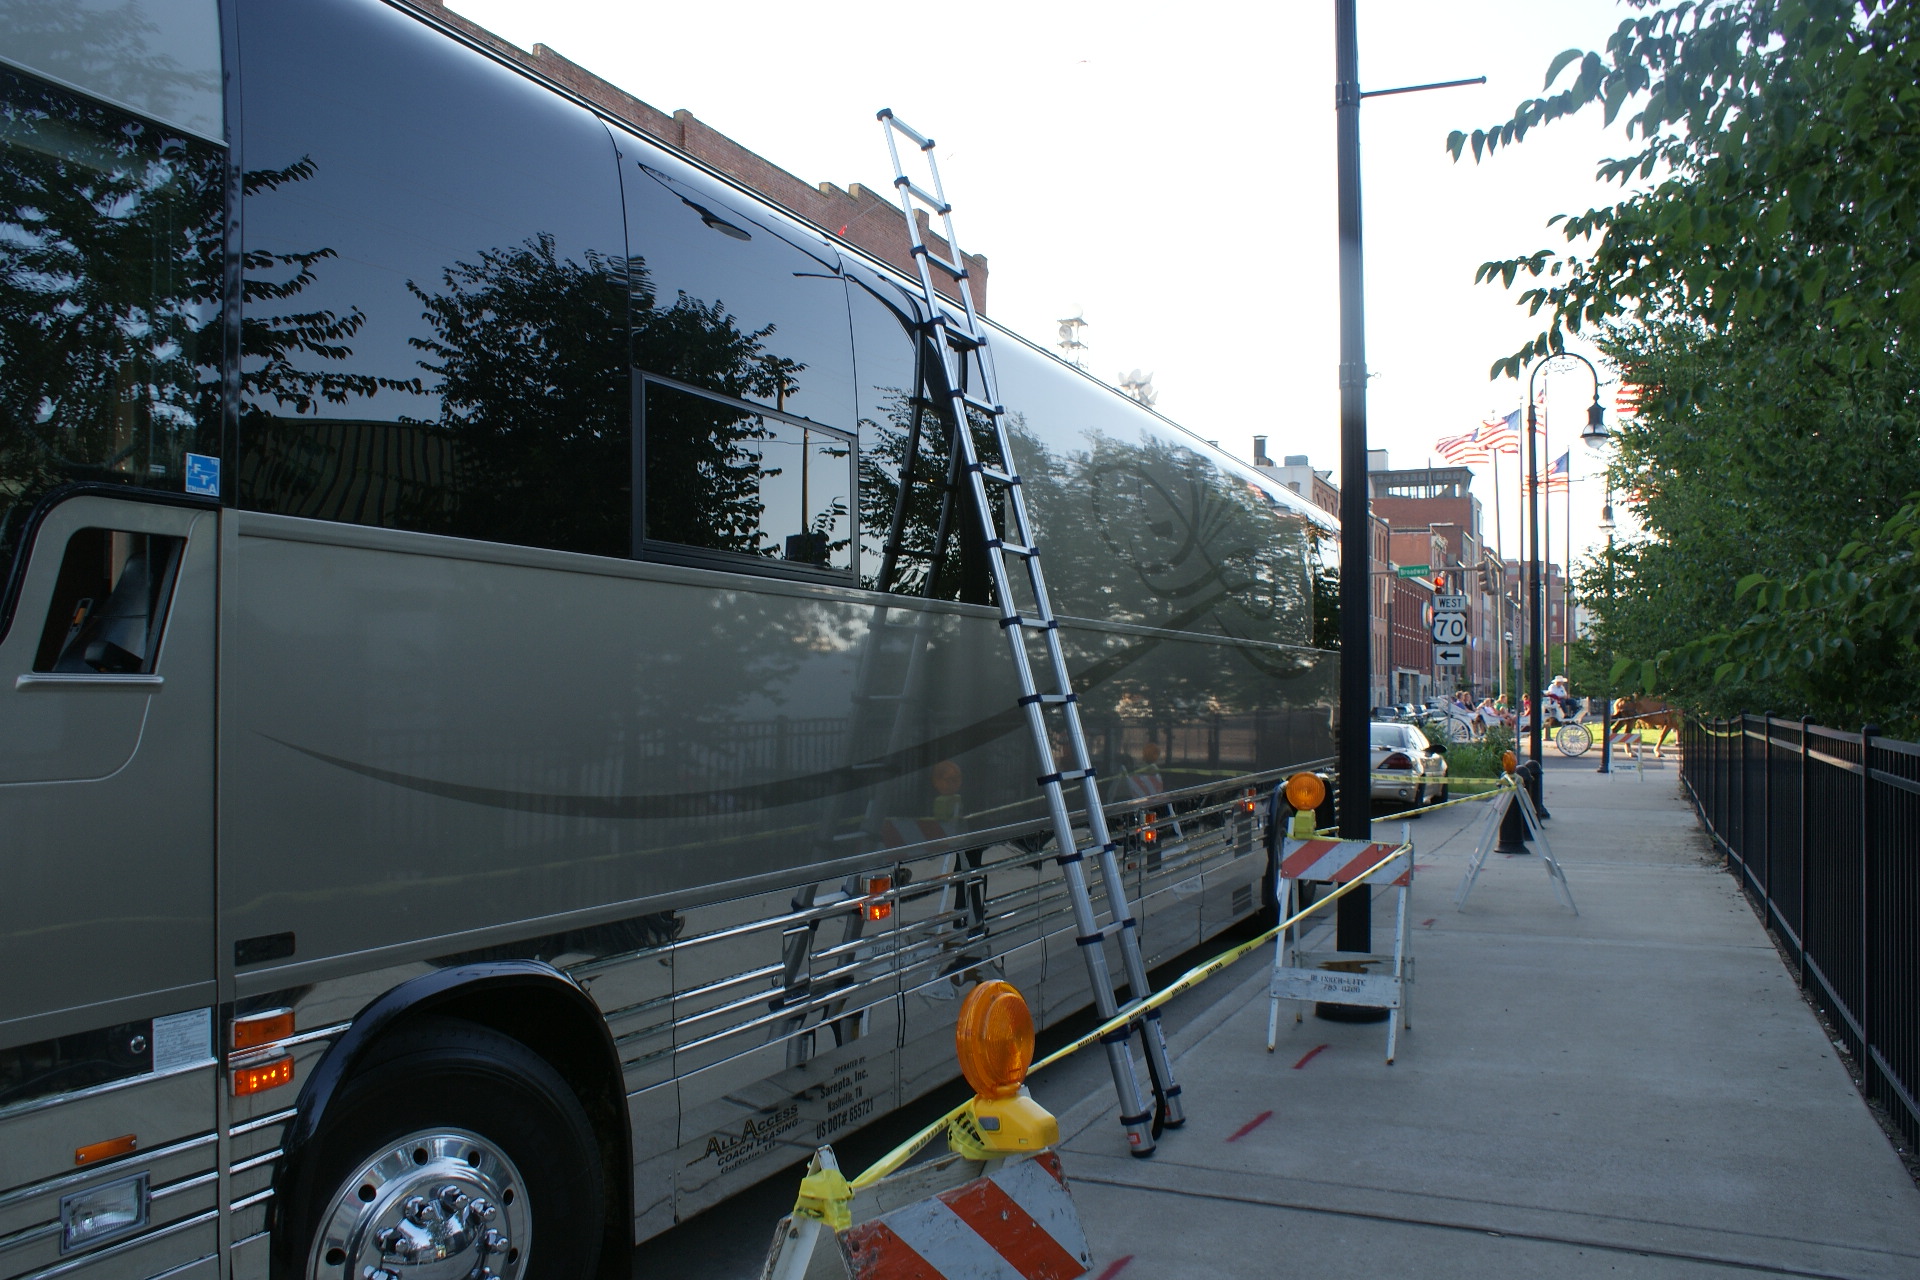 A 785P telescoping ladder being used to access the top of this tour bus.